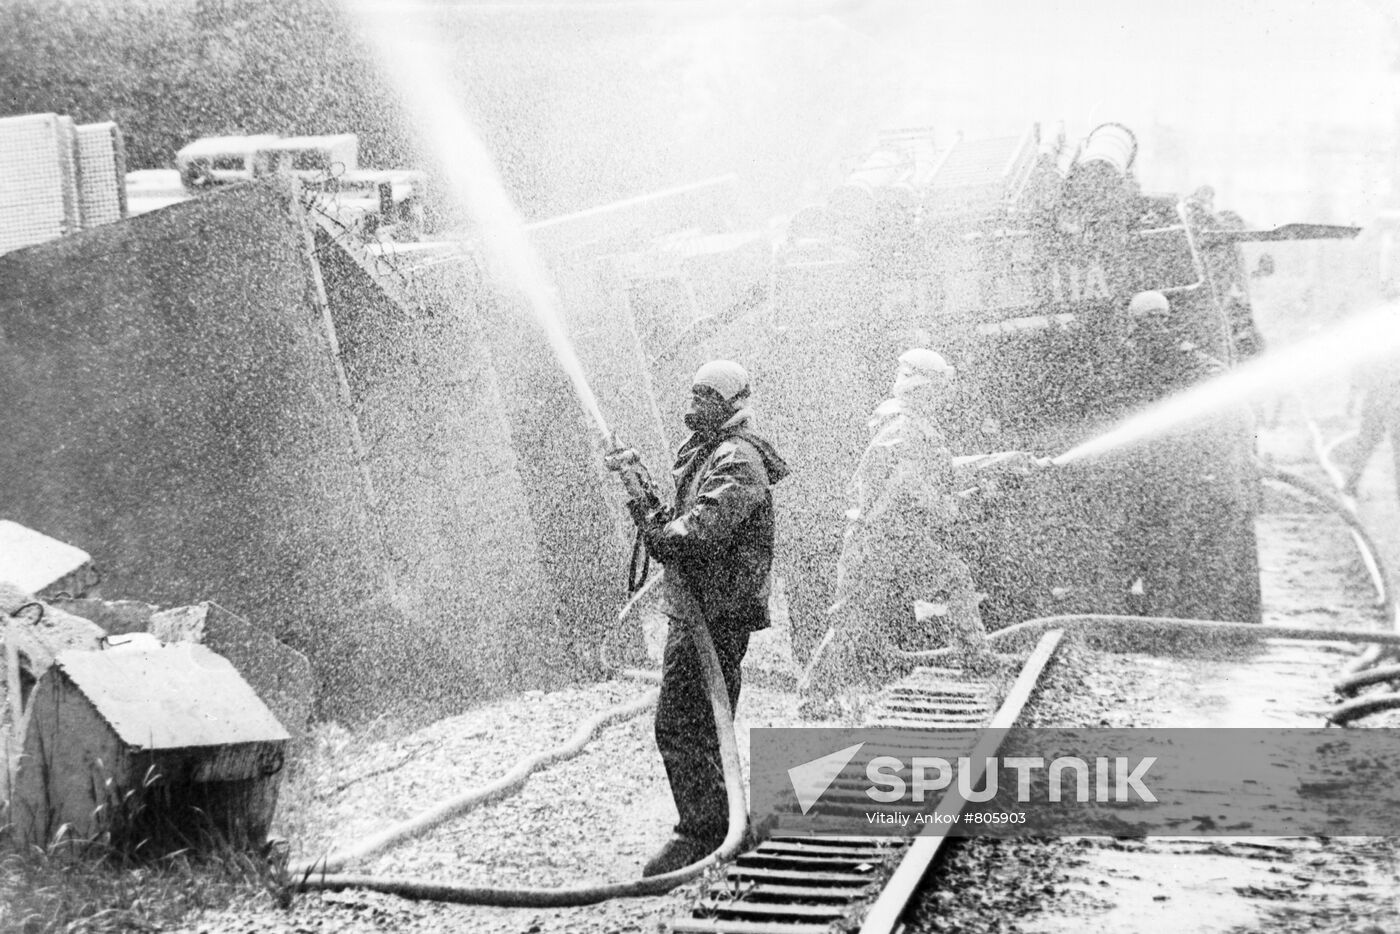 Decontamination on the Chernobyl Nuclear Plant site